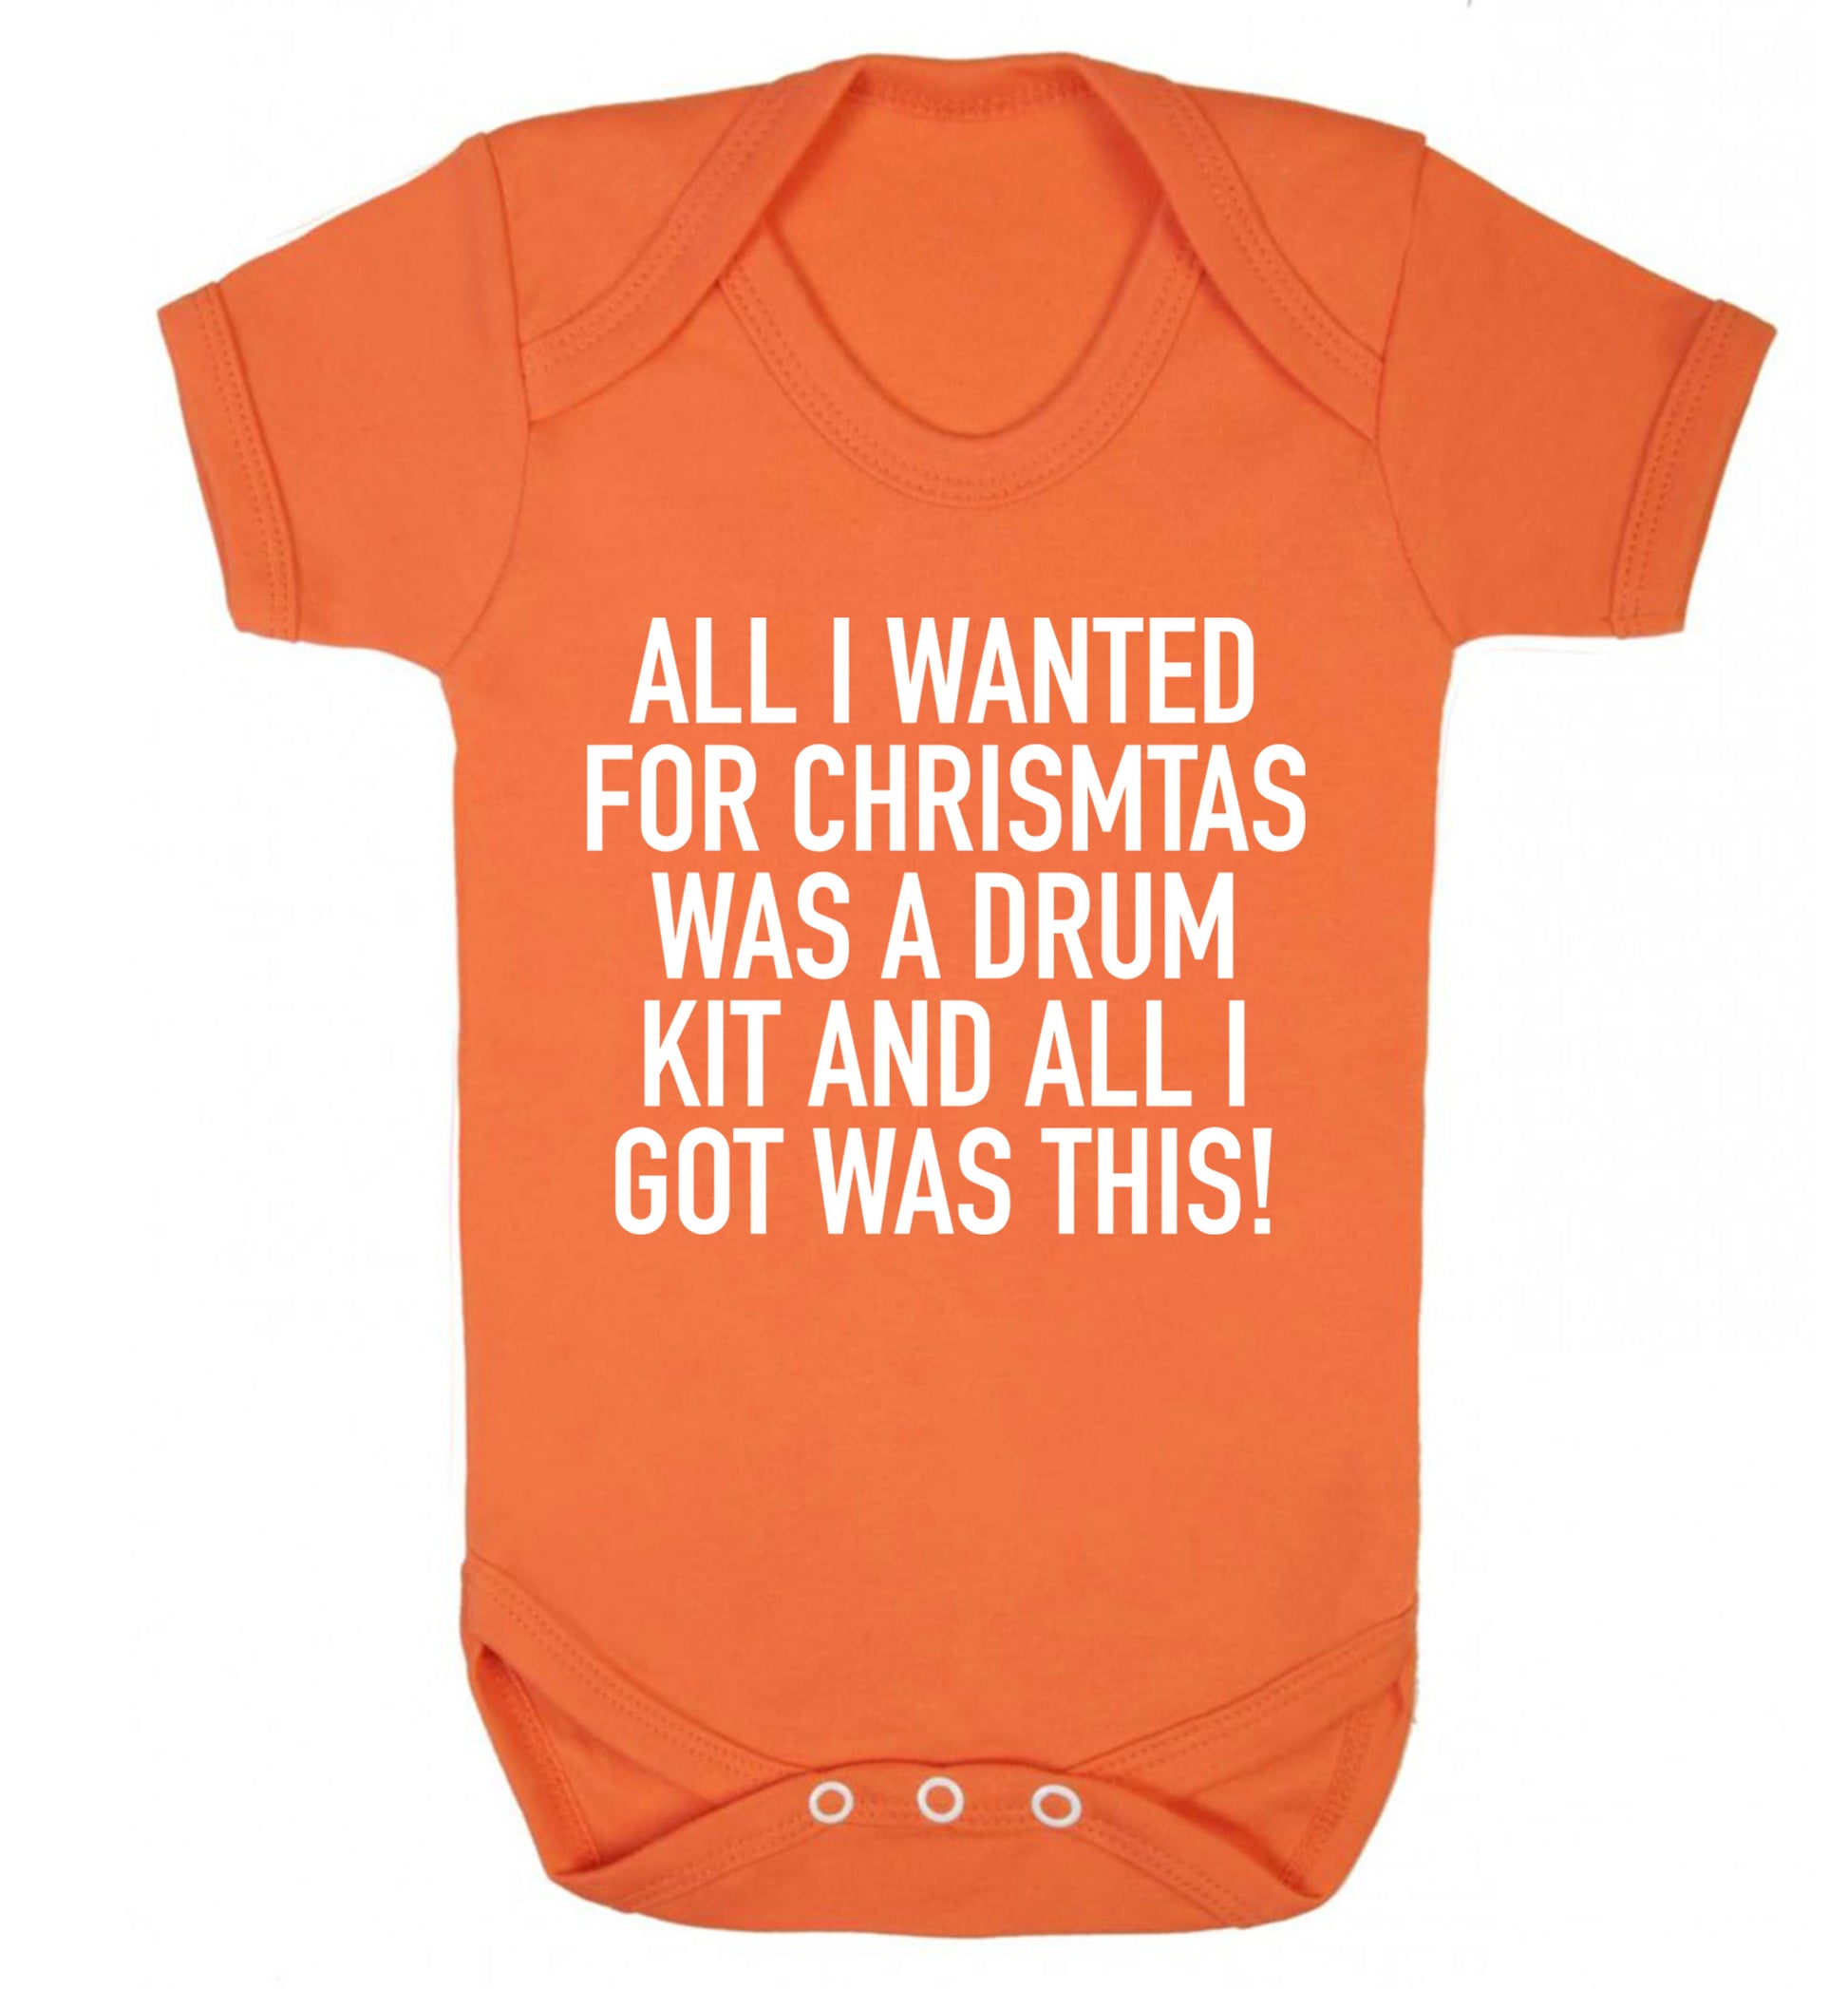 All I wanted for Christmas was a drum kit and all I got was this! Baby Vest orange 18-24 months